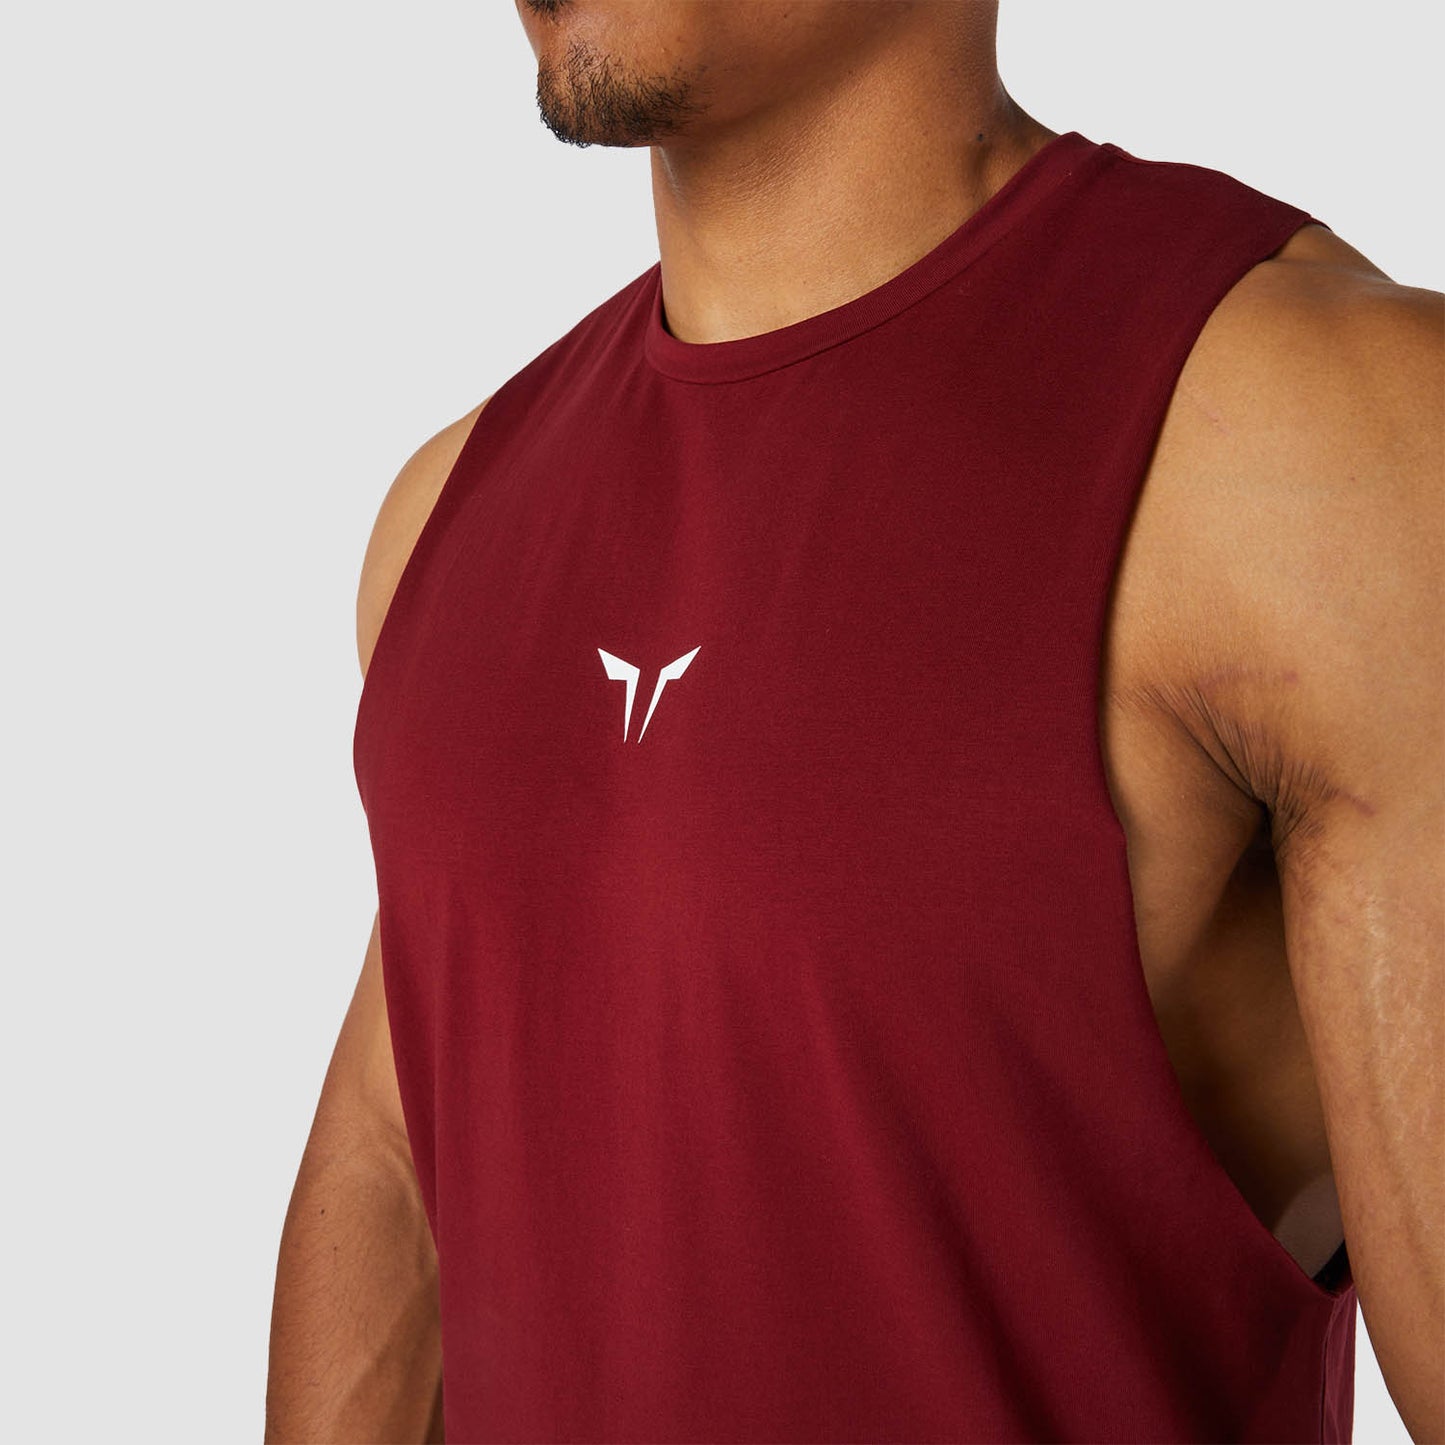 squatwolf-gym-wear-core-tank-red-workout-tank-tops-for-men